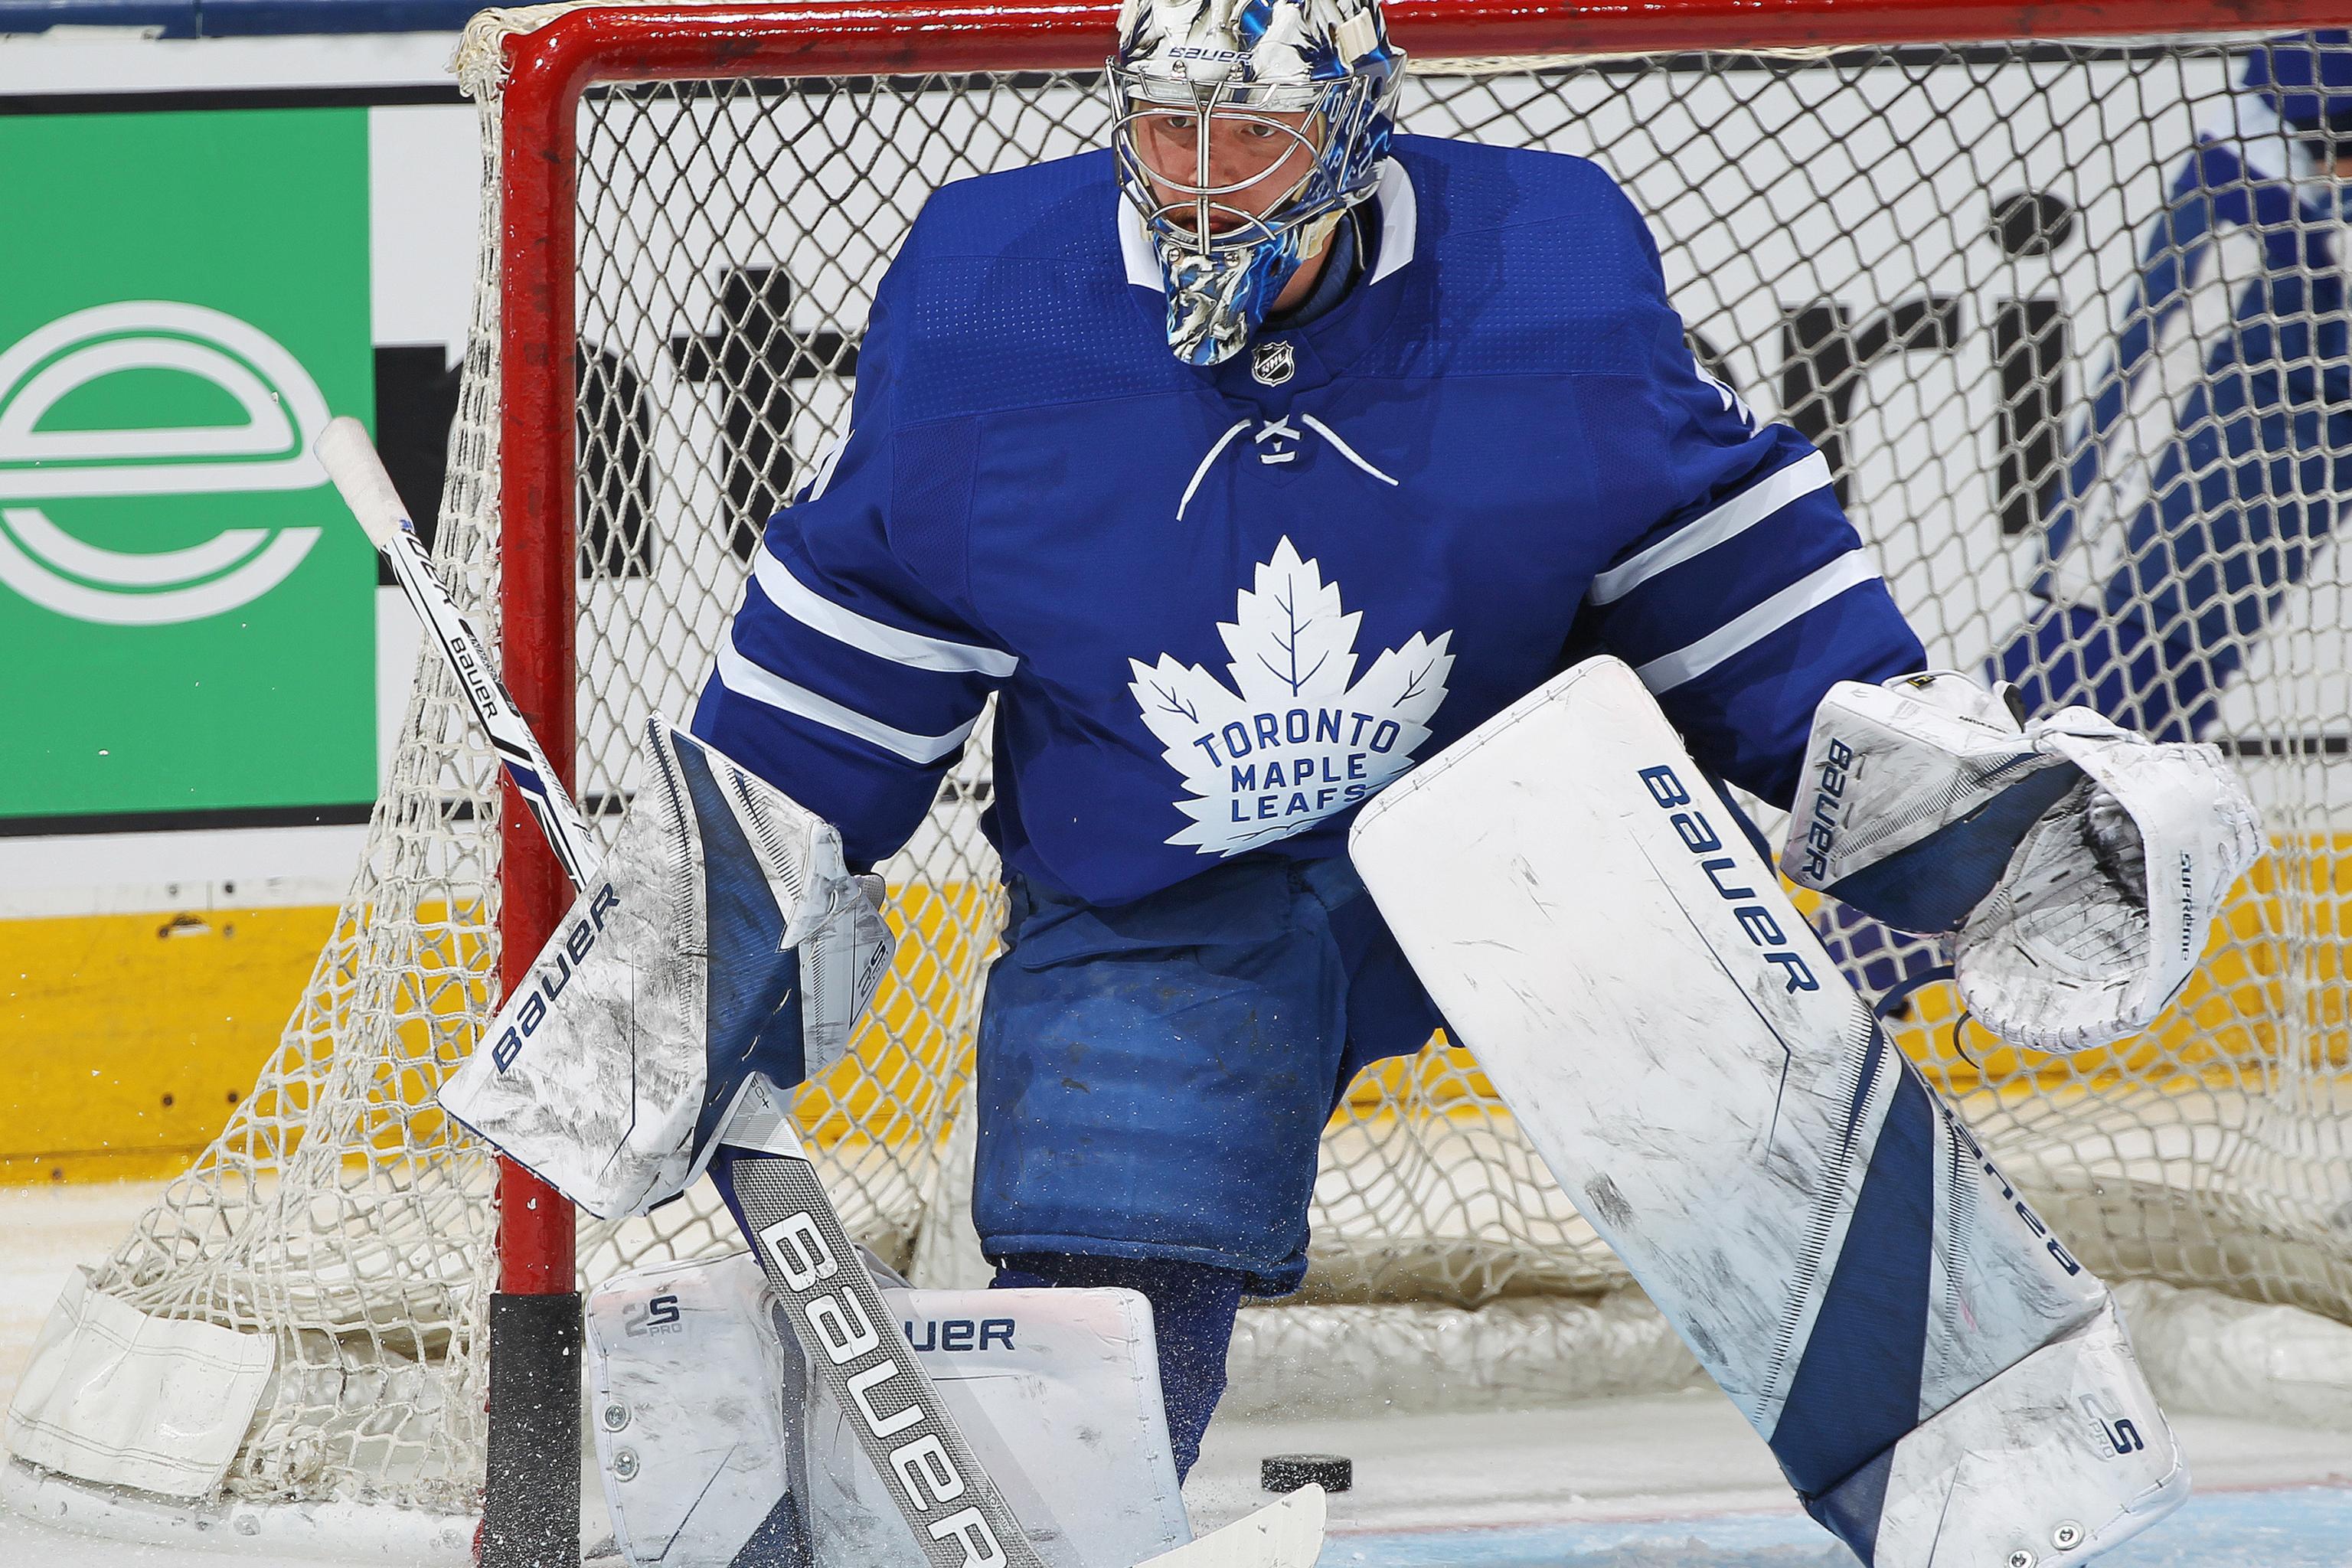 Toronto Maple Leafs Vs Boston Bruins Game 7 Odds Analysis Nhl Betting Pick Bleacher Report Latest News Videos And Highlights